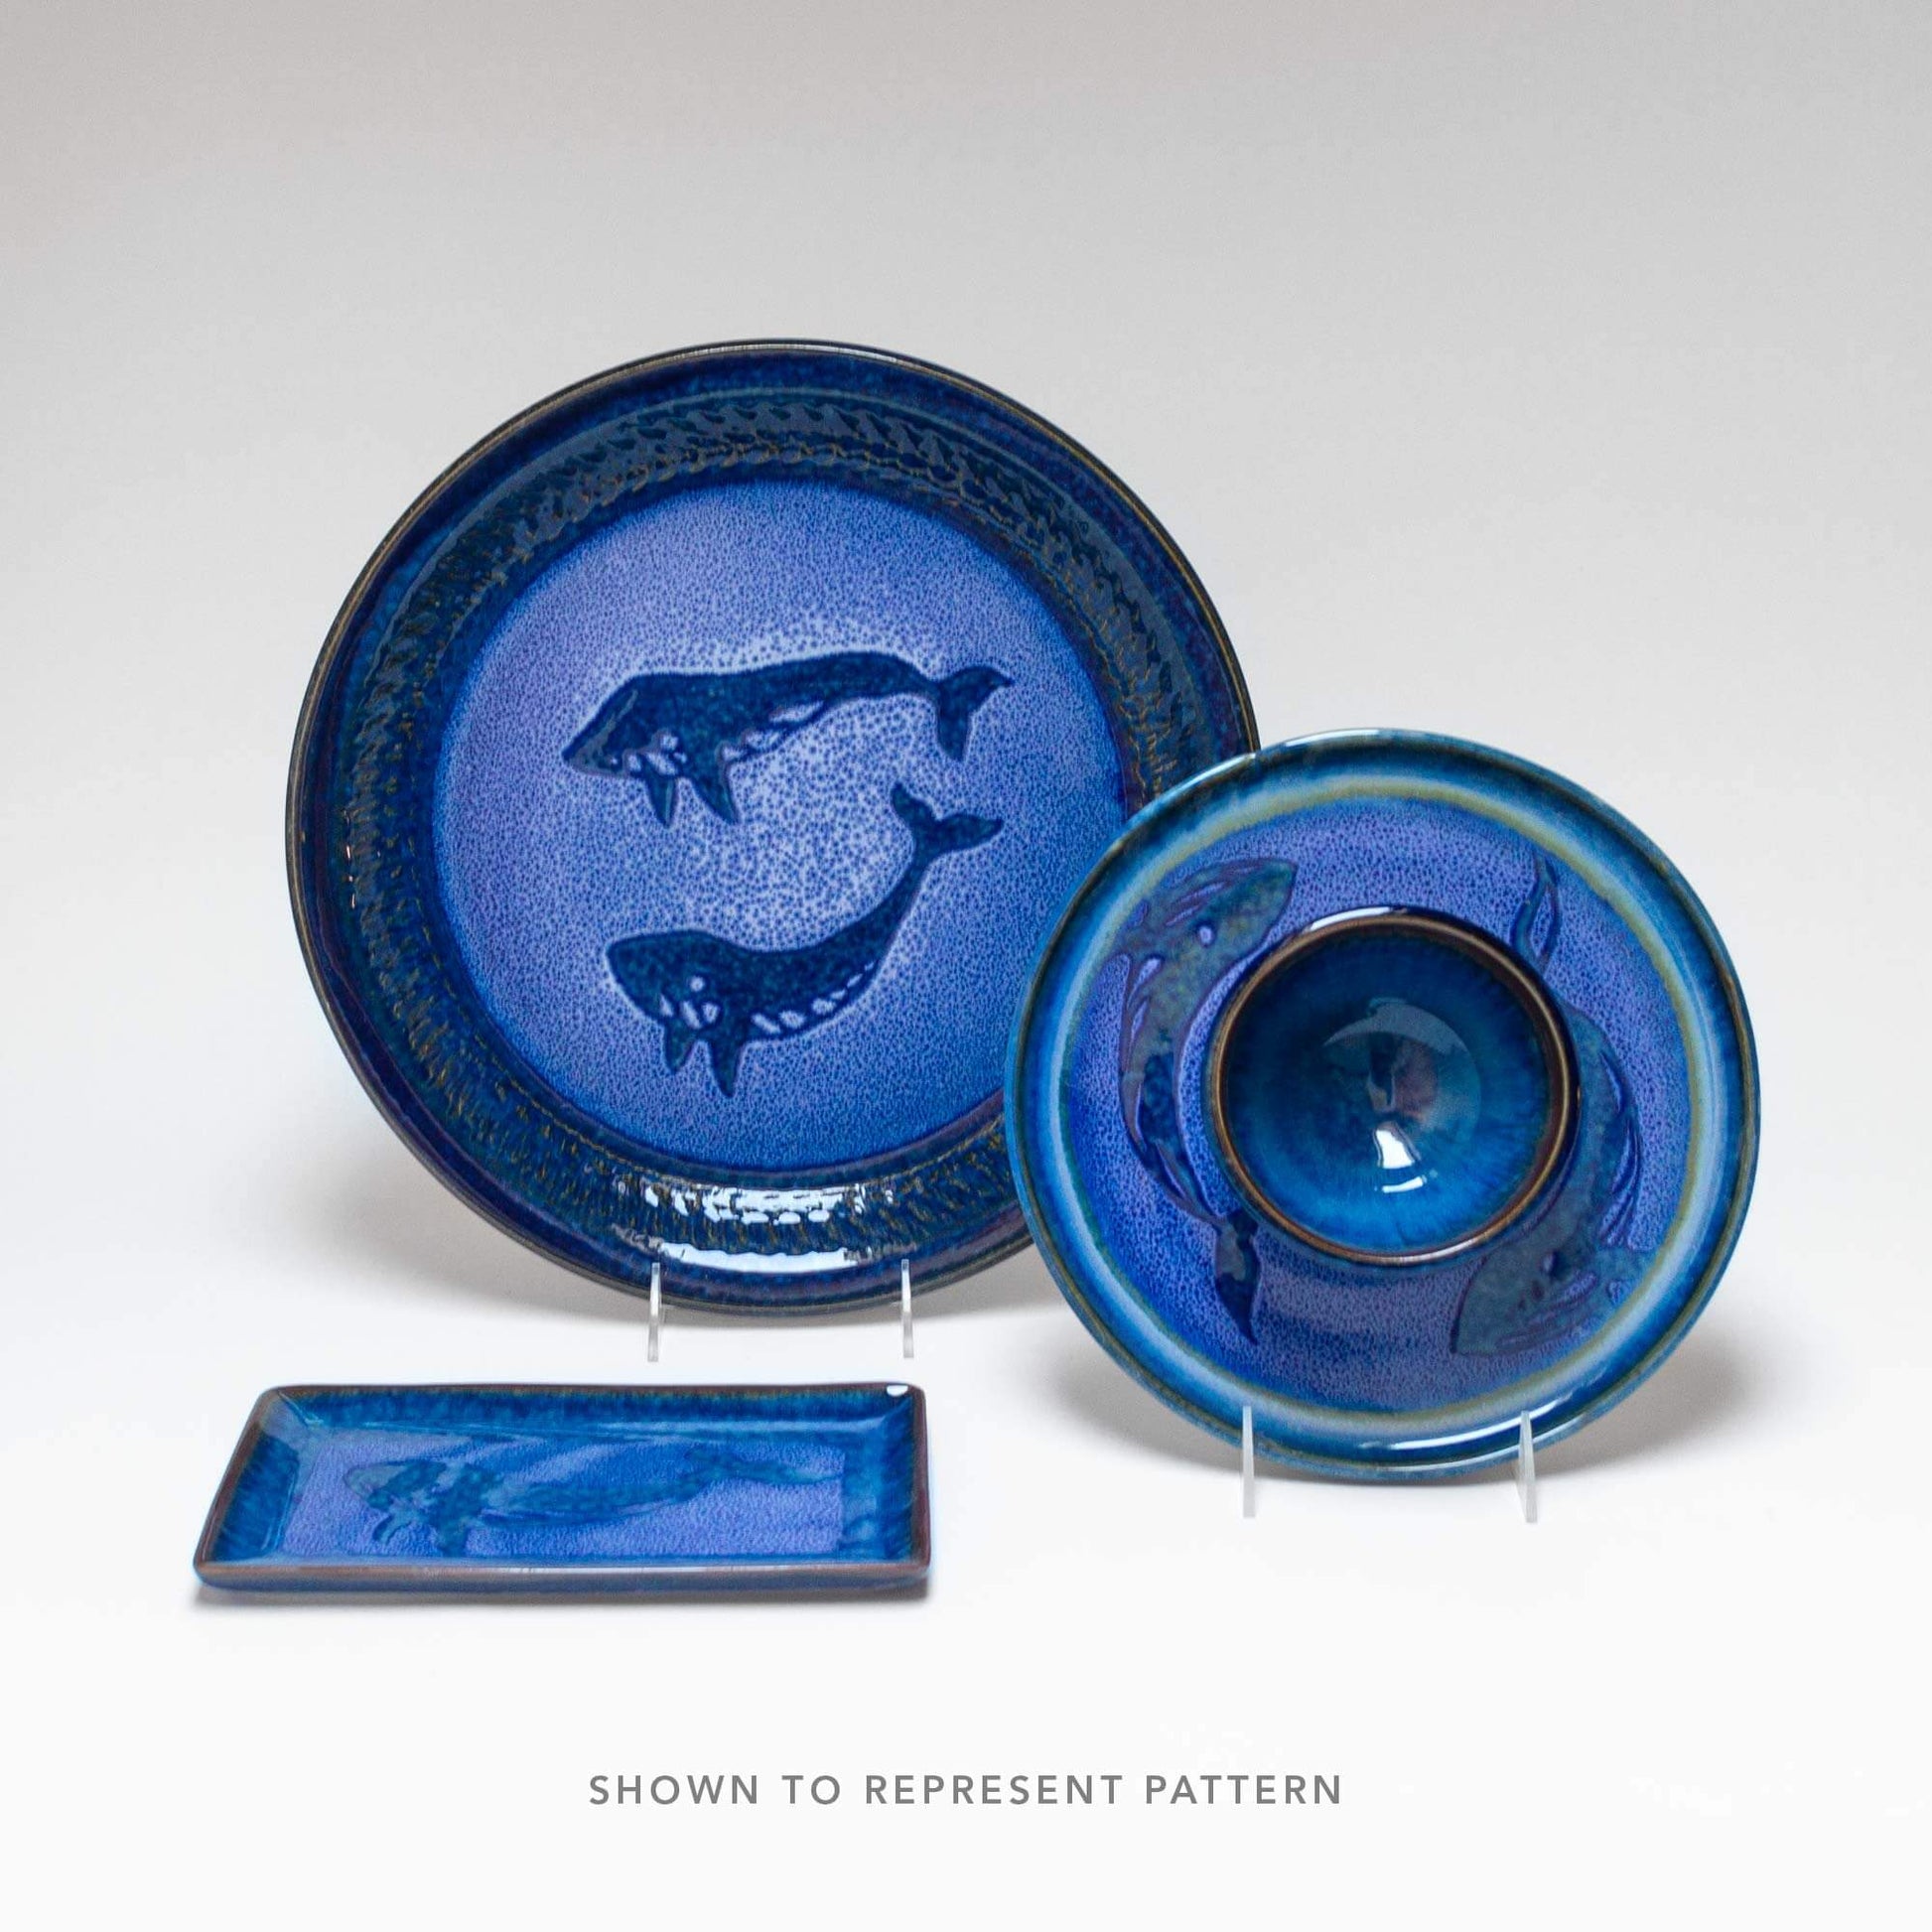 Handmade Pottery Trivet in Blue Whale pattern made by Georgetown Pottery in Maine